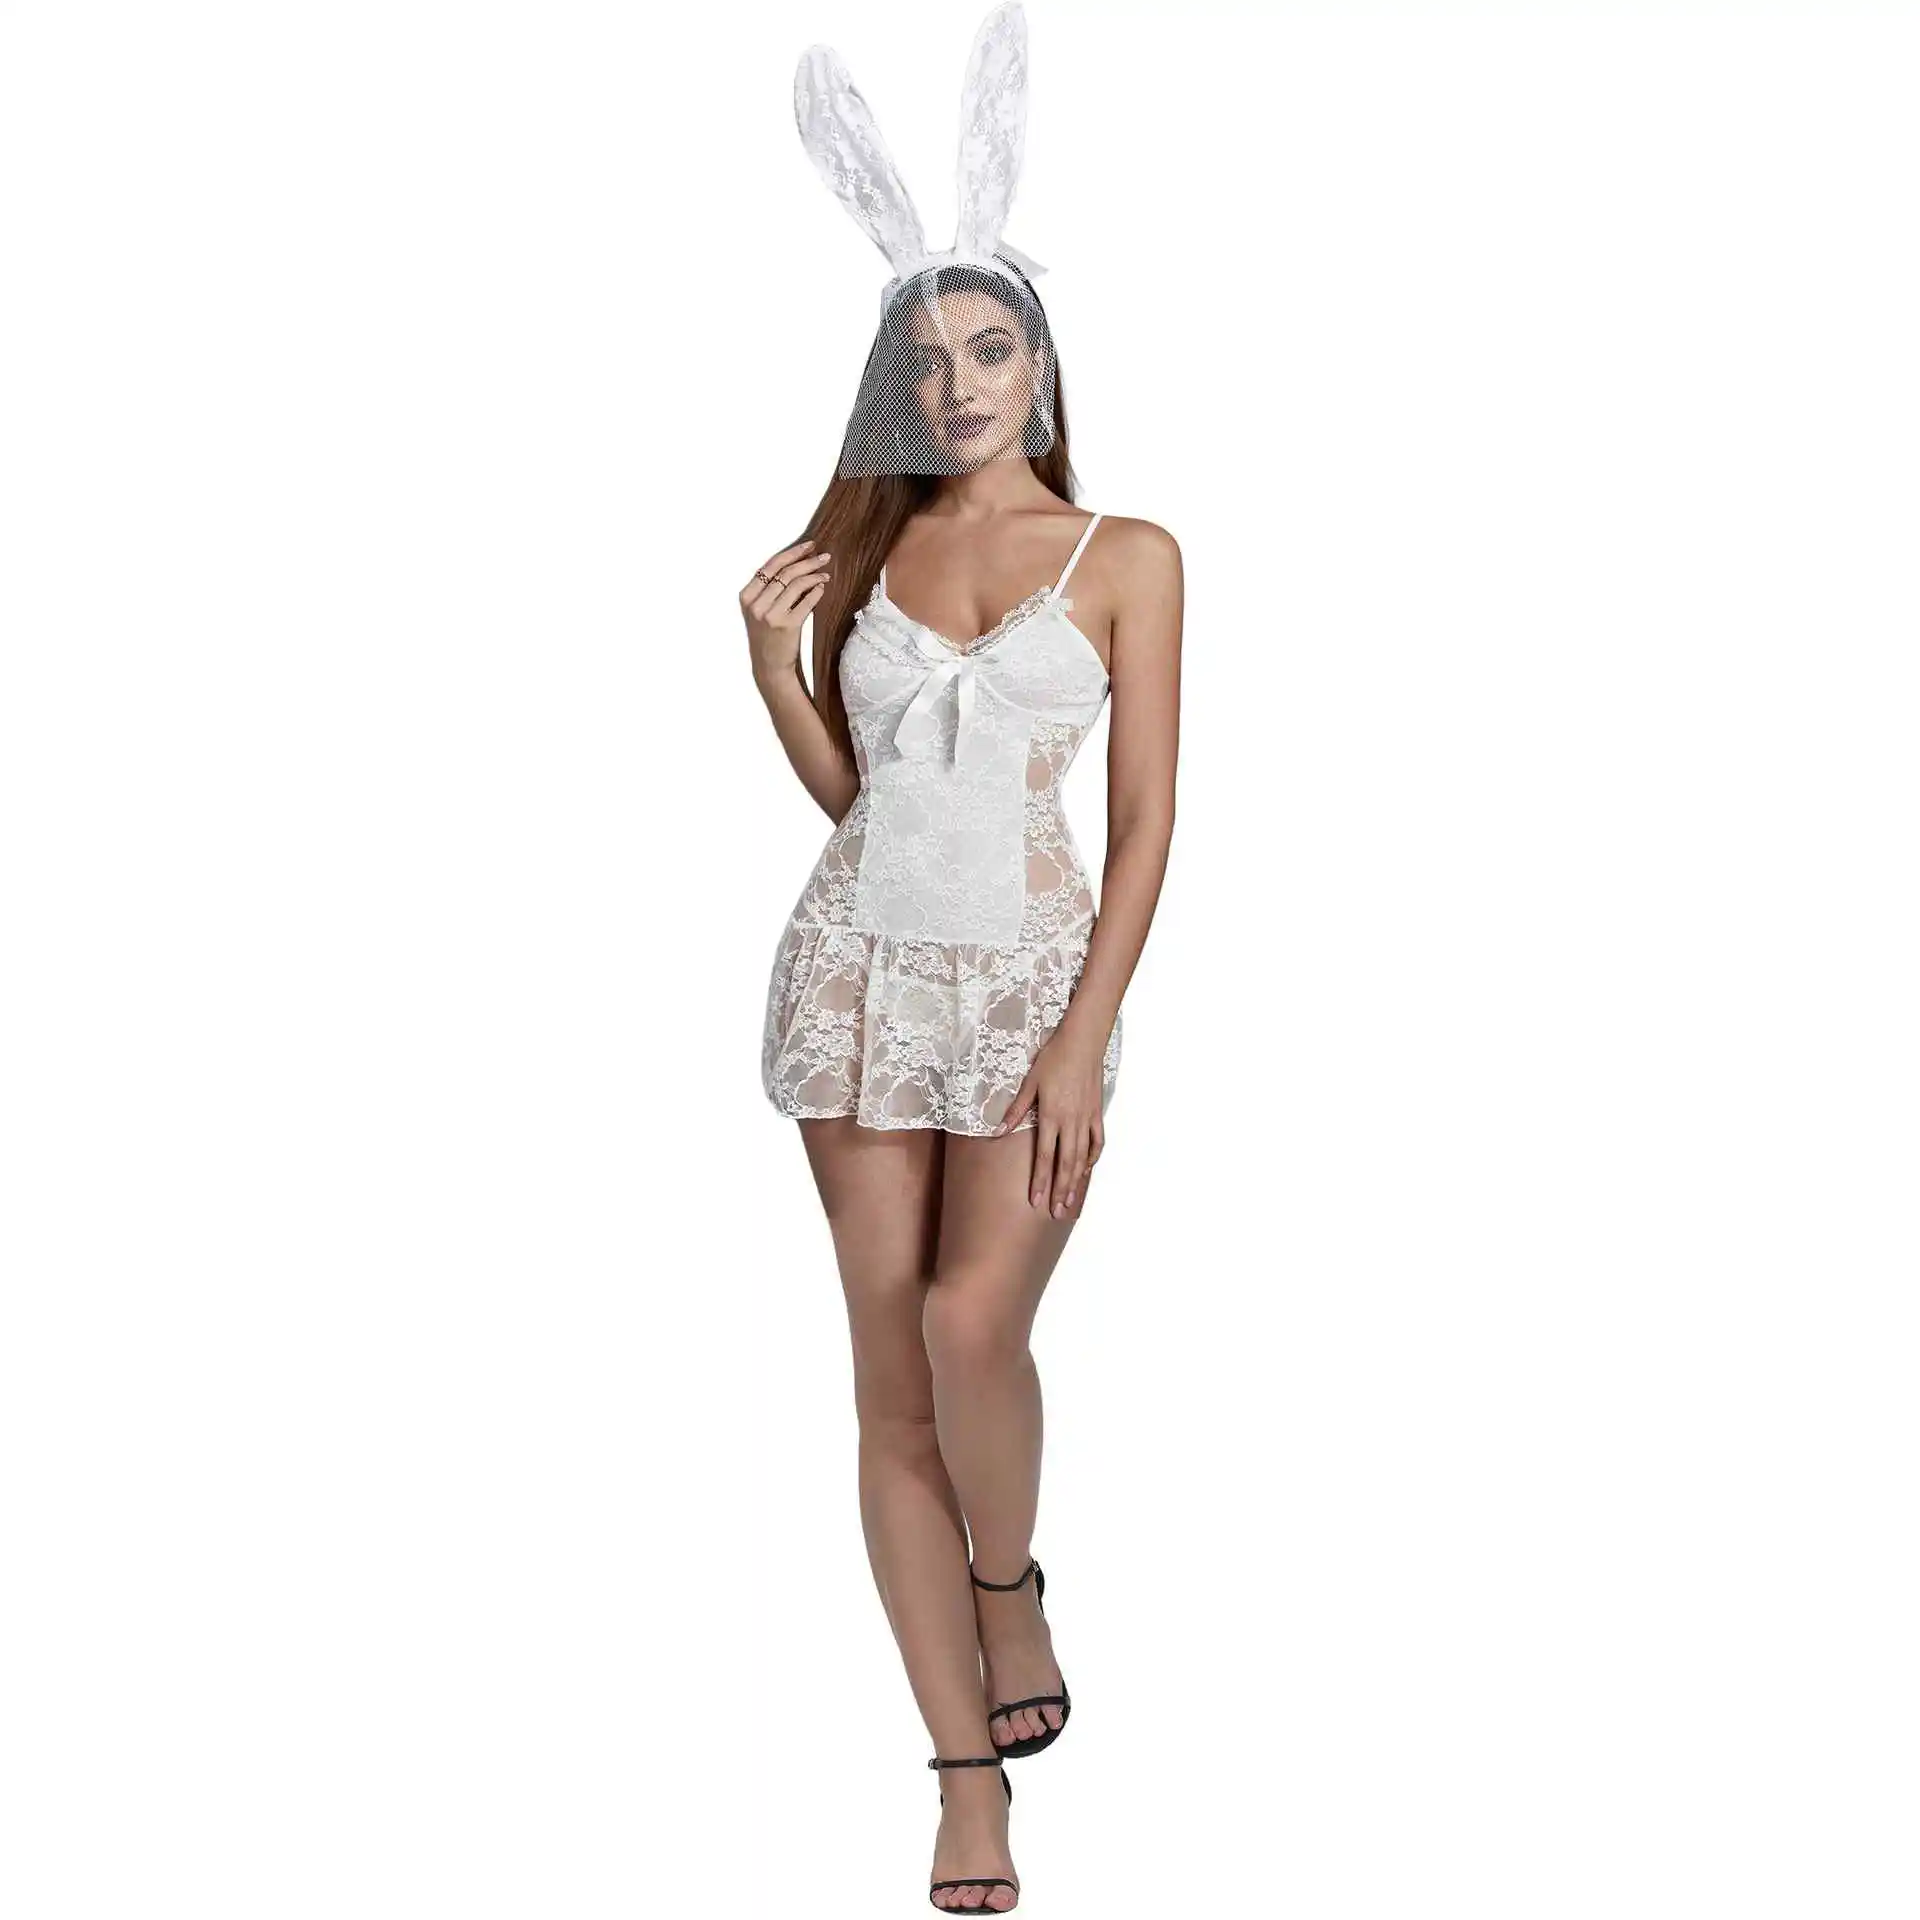 

Wholesale Women's Sexy Lace Transparent Teddy Babydoll Adult Lady Erotic Roleplay Bunny Girl Lingerie Dress Night Fliter Costume